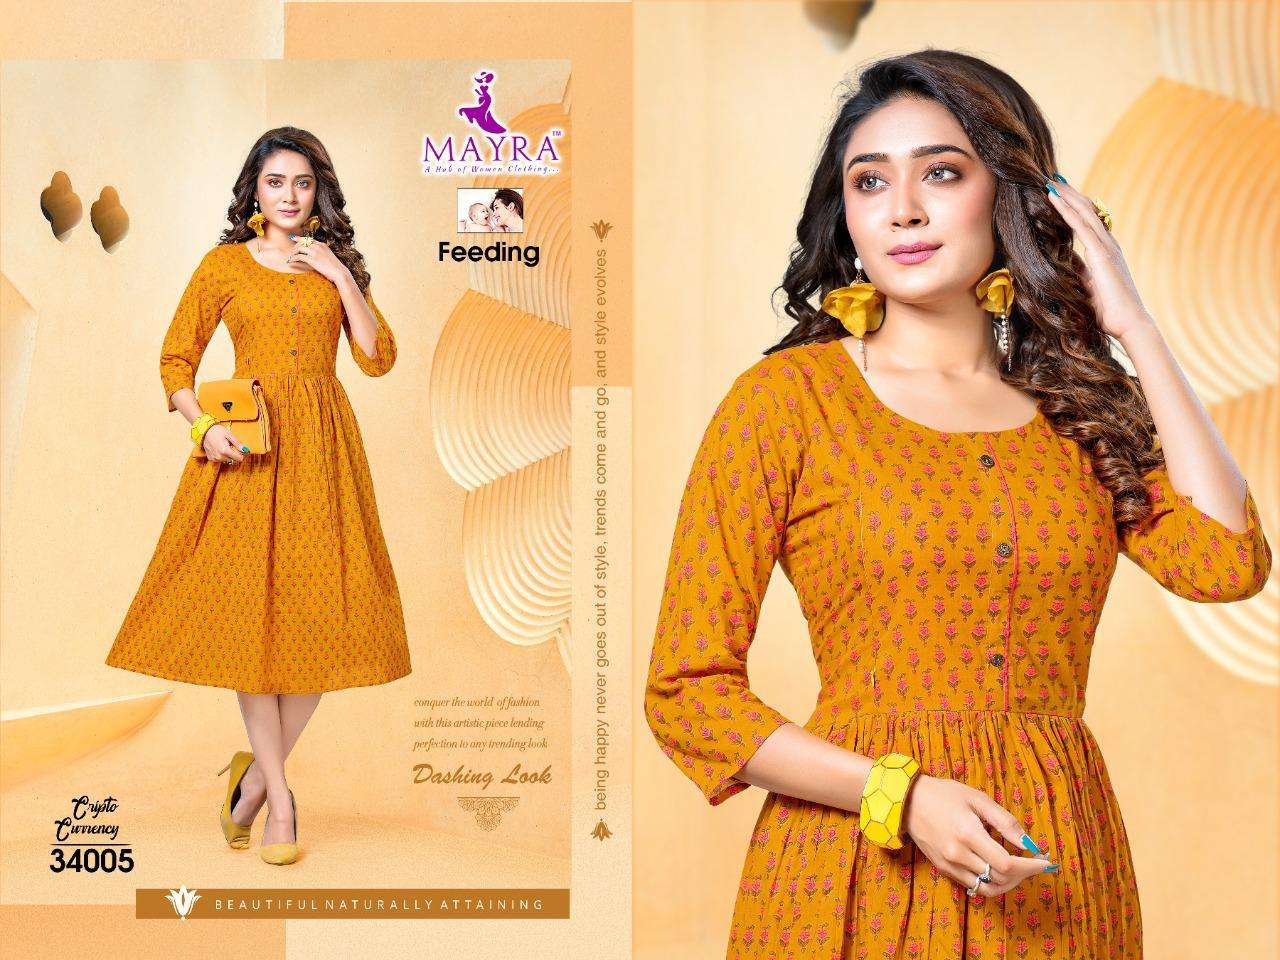 Cripto Currency By Mayra Heavy Pure 60*60 Cambric Jaipuri Cotton Umbrella Ghera Kurti With Full Interlock On Each Joint Feeding Top Kurti Catlog Wholesaler Best Rate In Surat